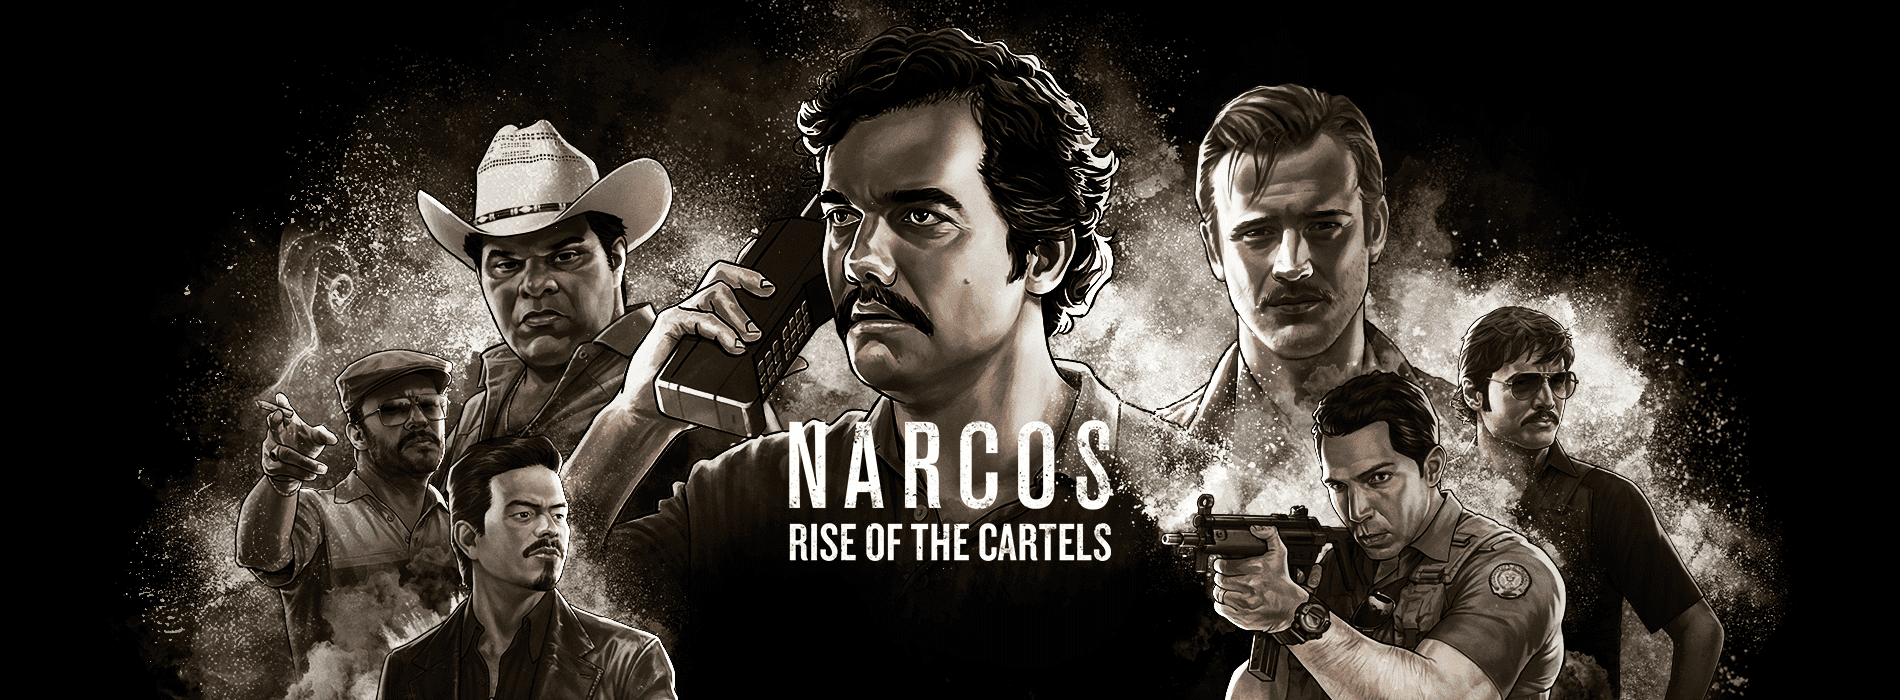 Turn-Based Tactical Strategy Game Narcos: Rise of the Cartels Out Now